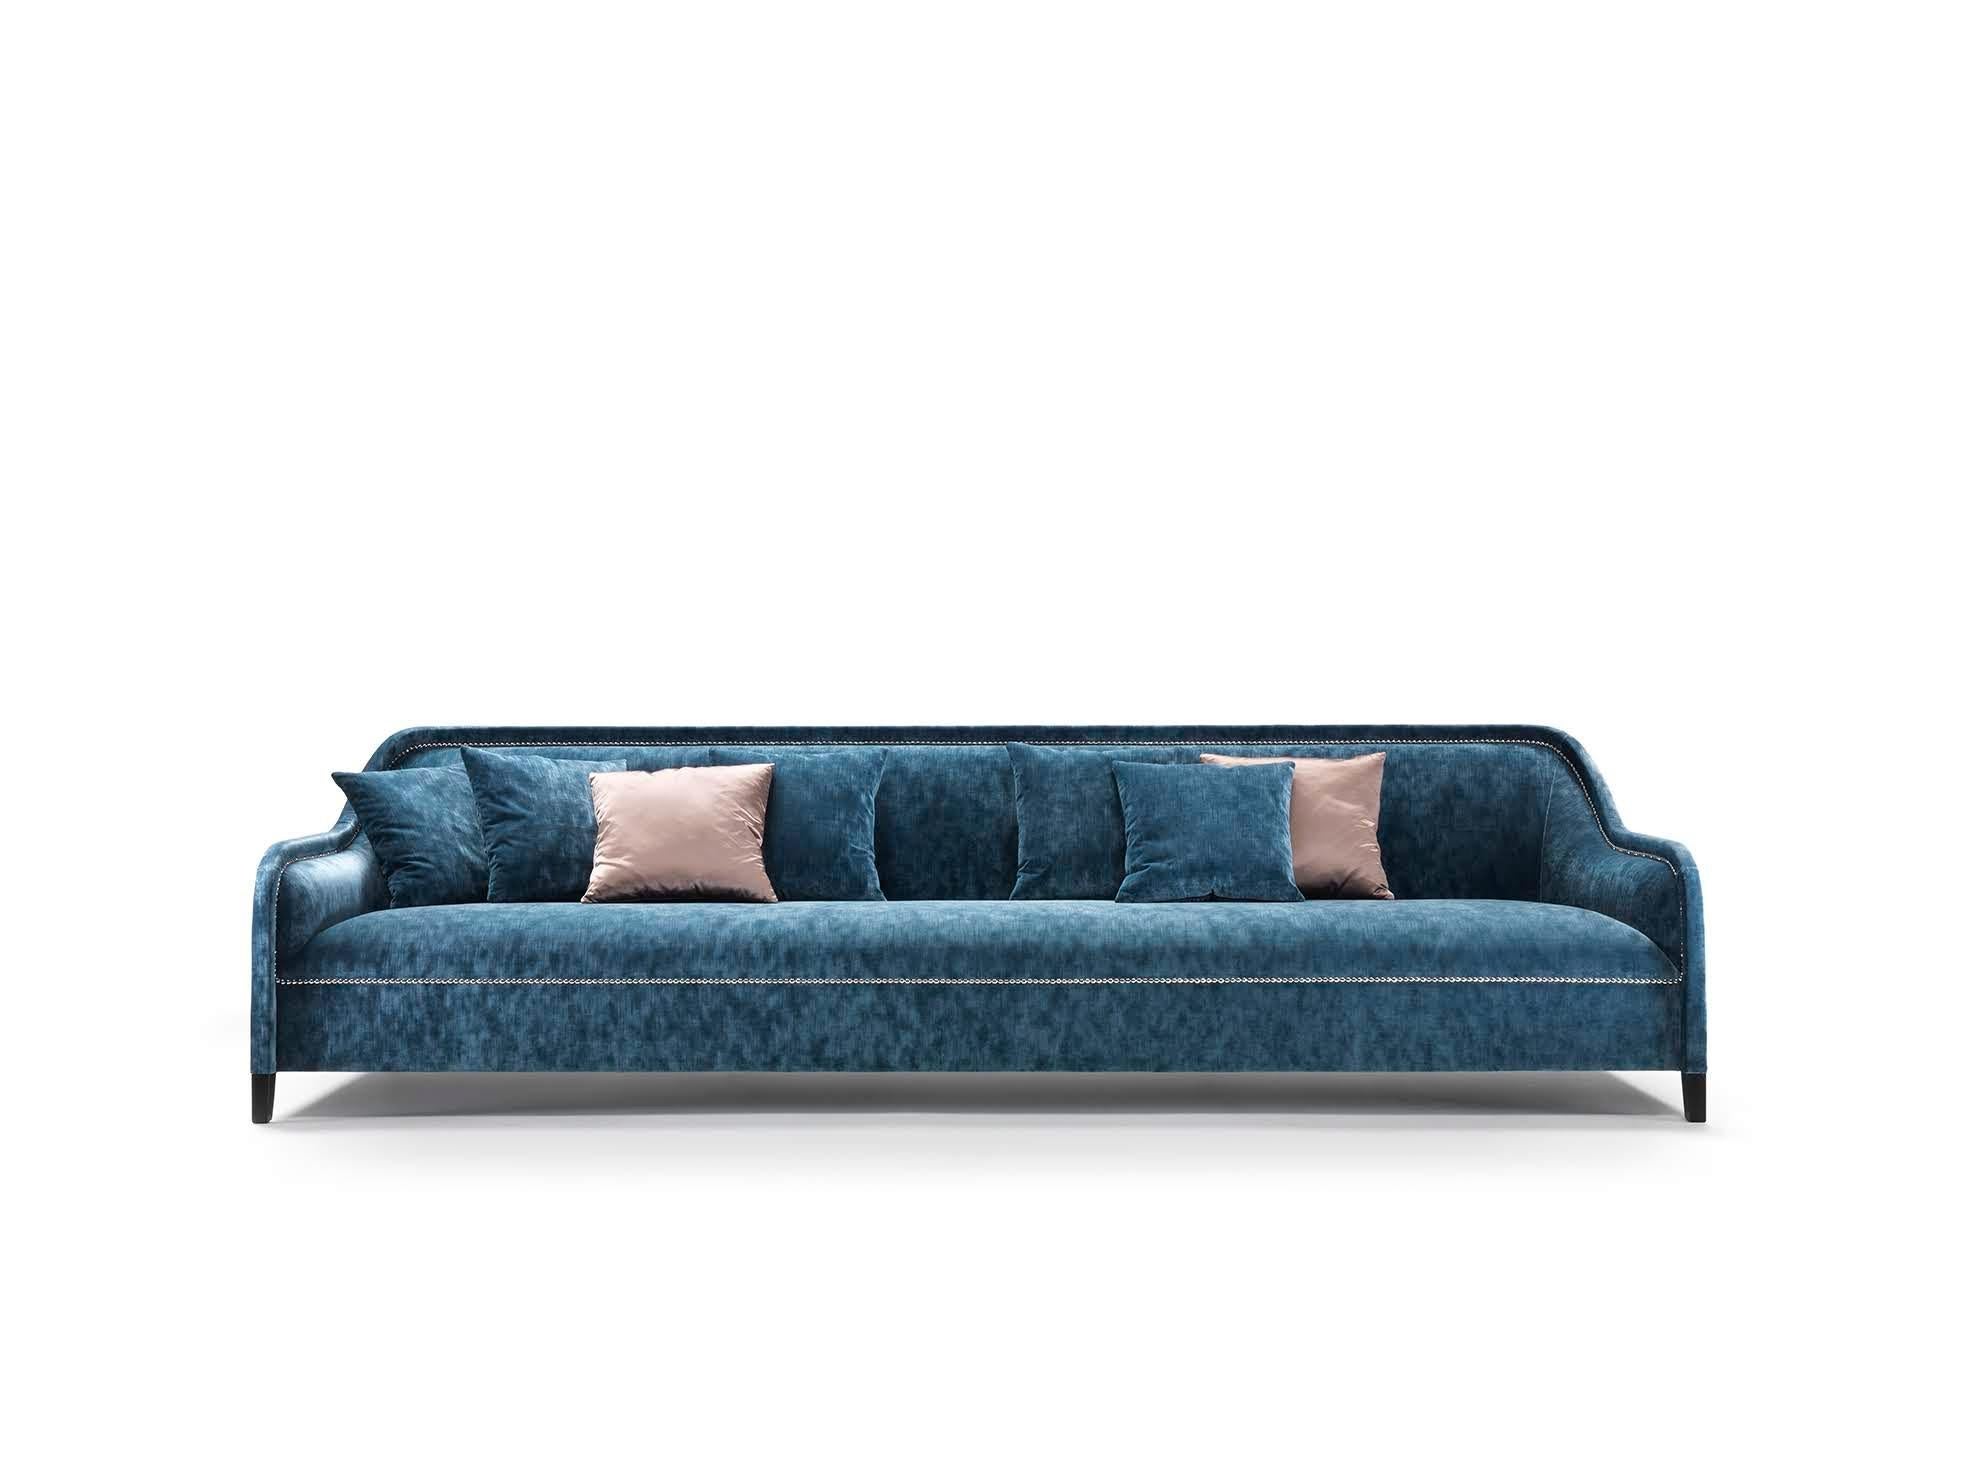 The Arpège sofa demonstrates how the creative inspiration of the designers Castello Lagravinese achieve to create products with clear references to the tradition, in which supple and generous lines are reviewed on a contemporaneous way; In